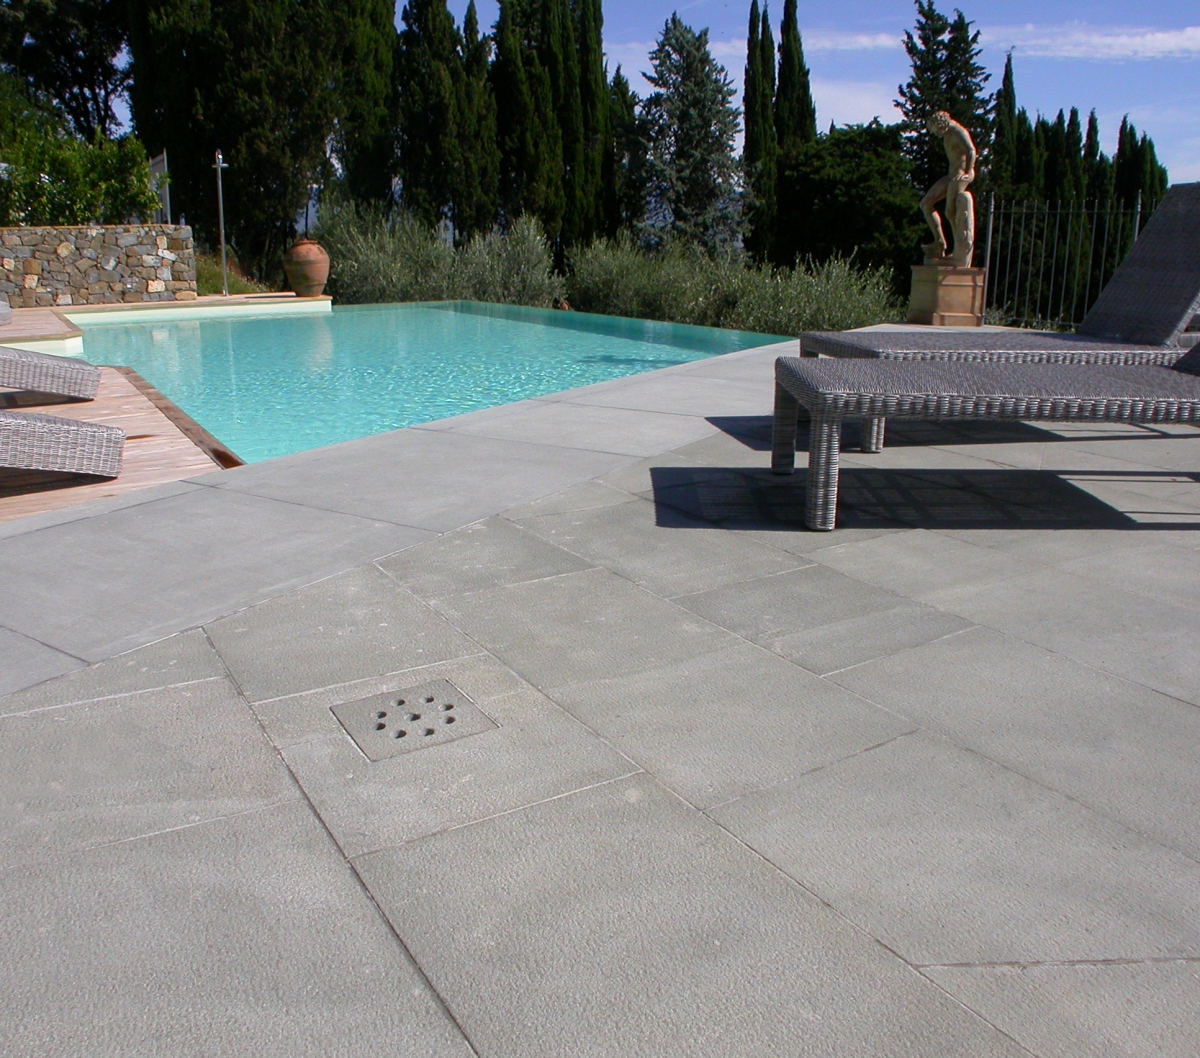 Pool copings and flooring of Pietra Macigno finishing hammered